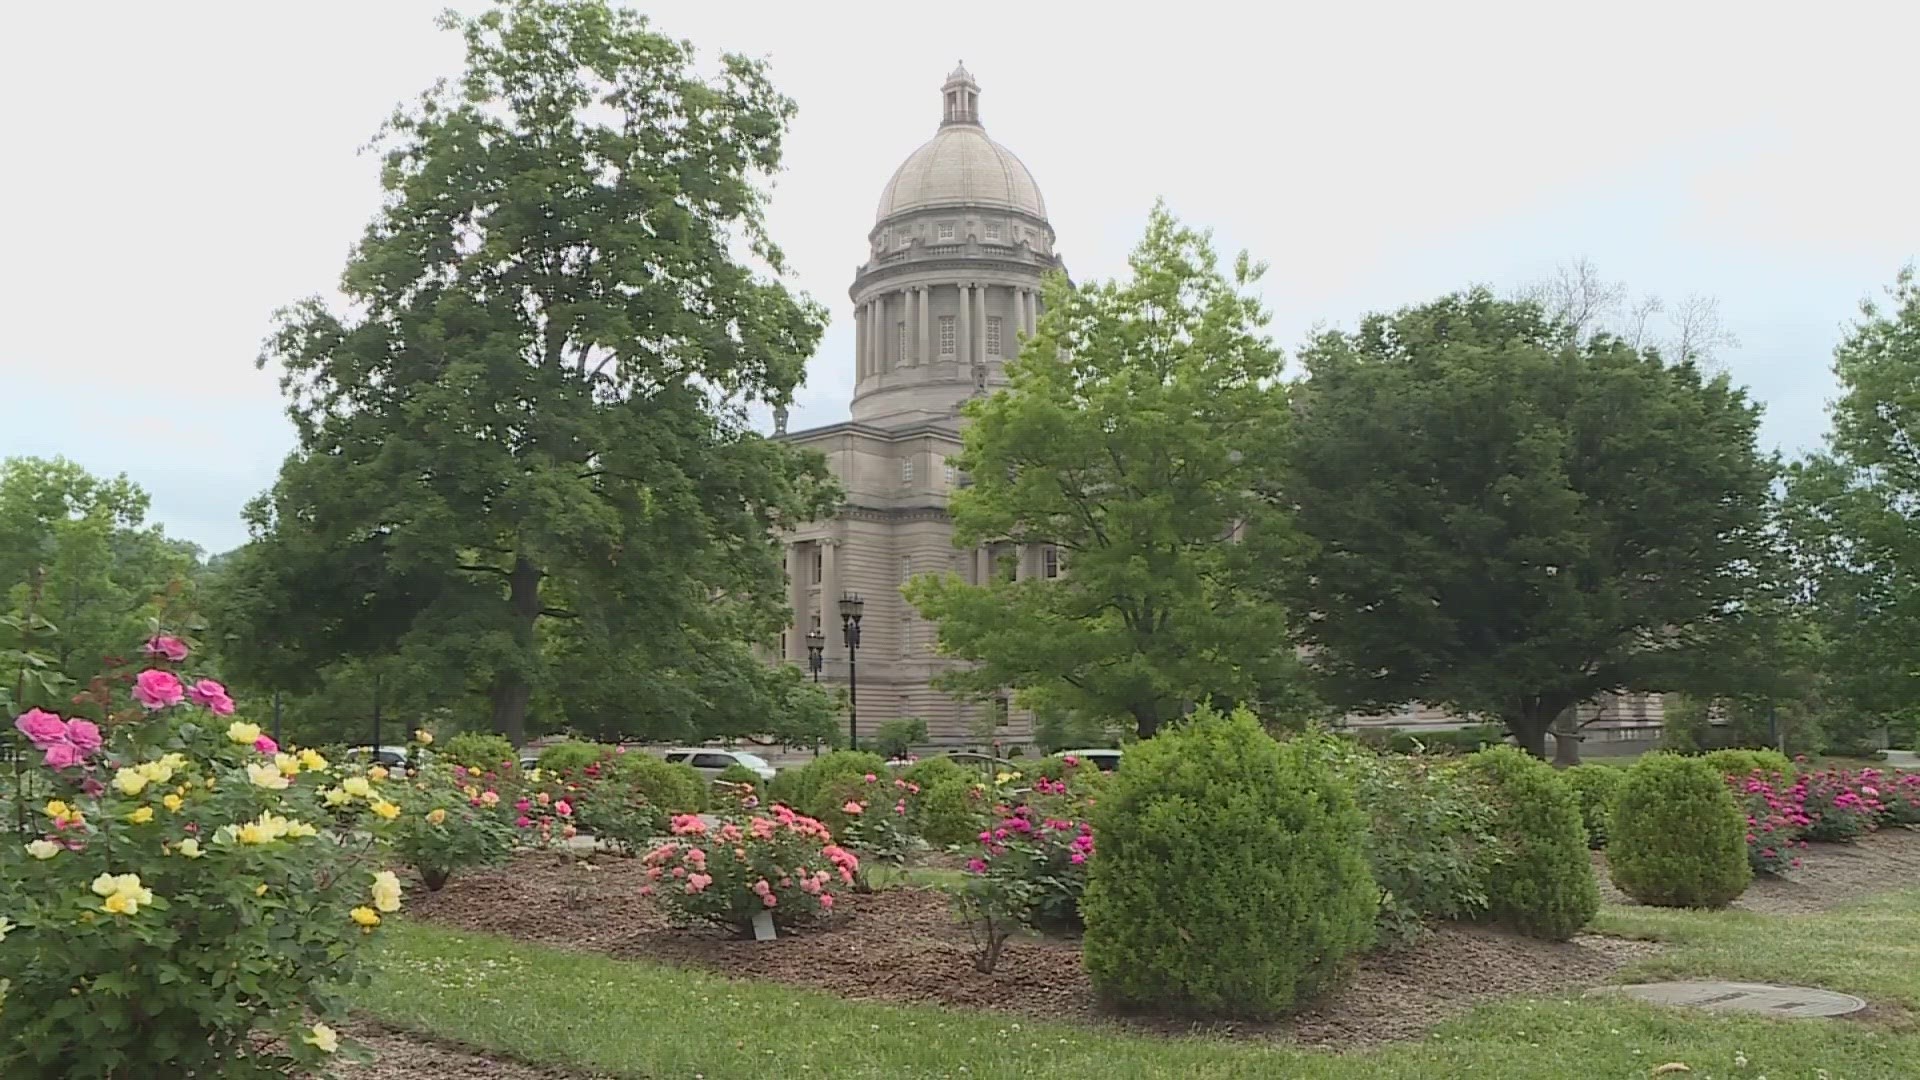 One of the bills seeks to make the Kentucky Board of Education "less political."